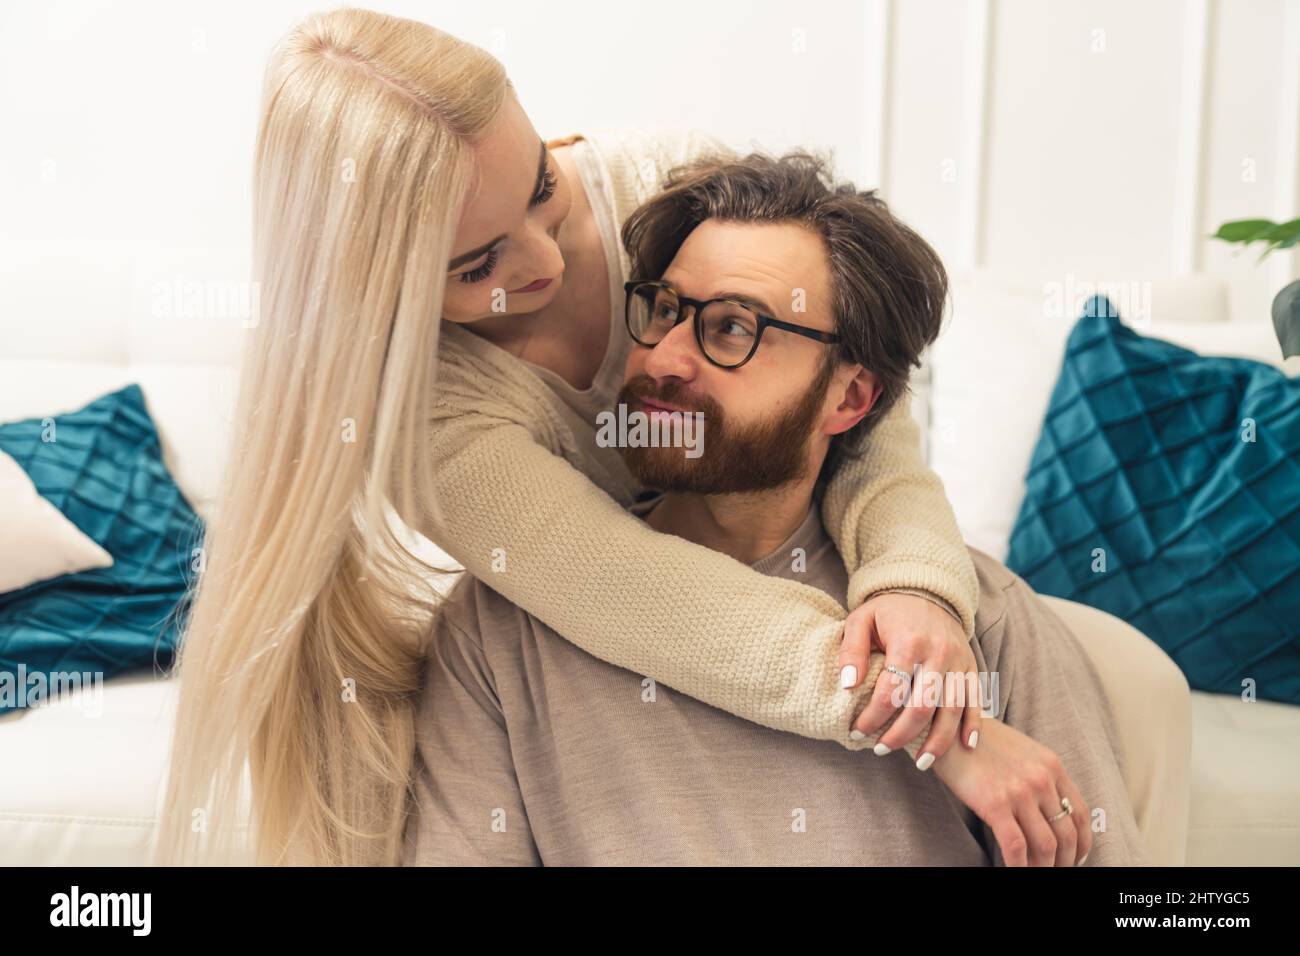 adorable millennial couple cuddling and looking each other in the eye, trustful and happy relationship concept. High quality photo Stock Photo